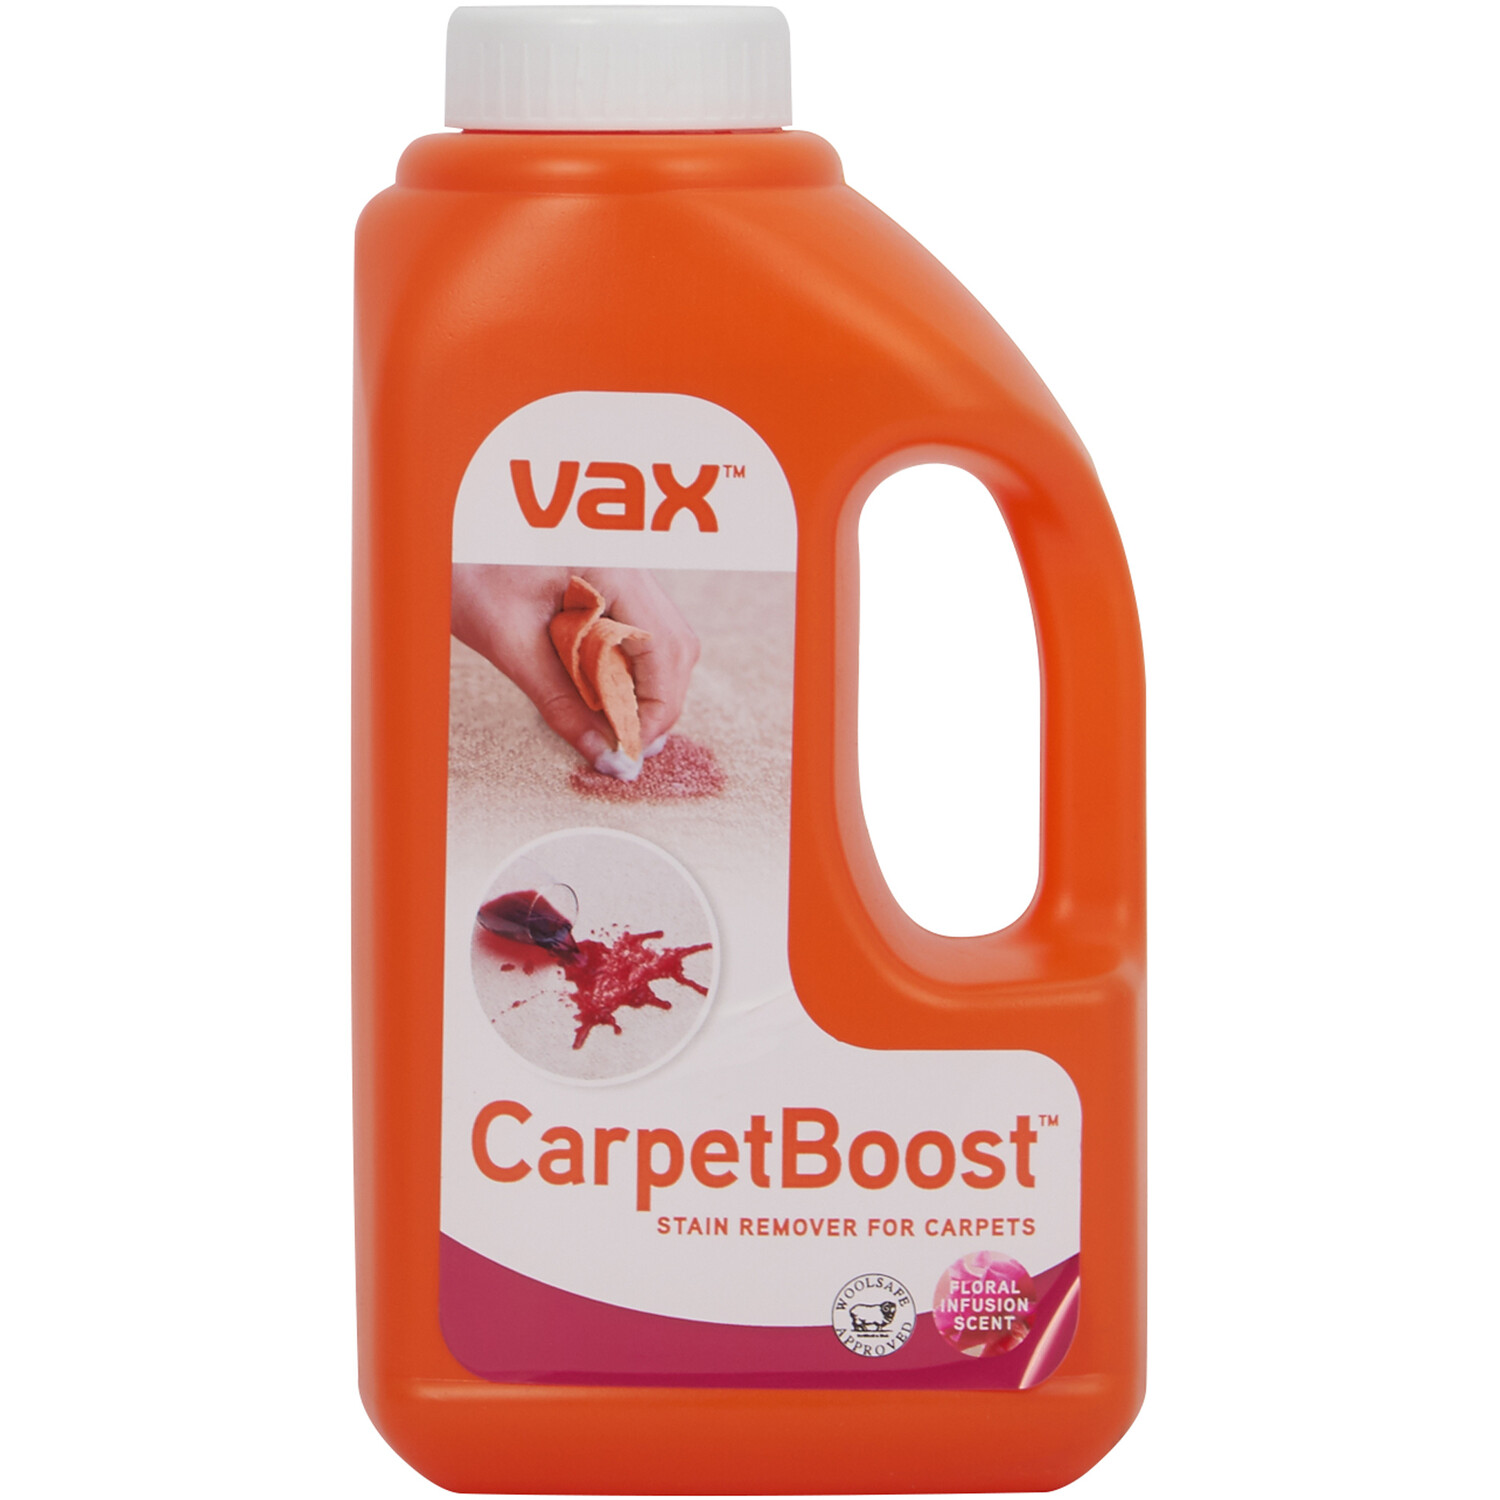 Vax CarpetBoost Stain Remover Image 1